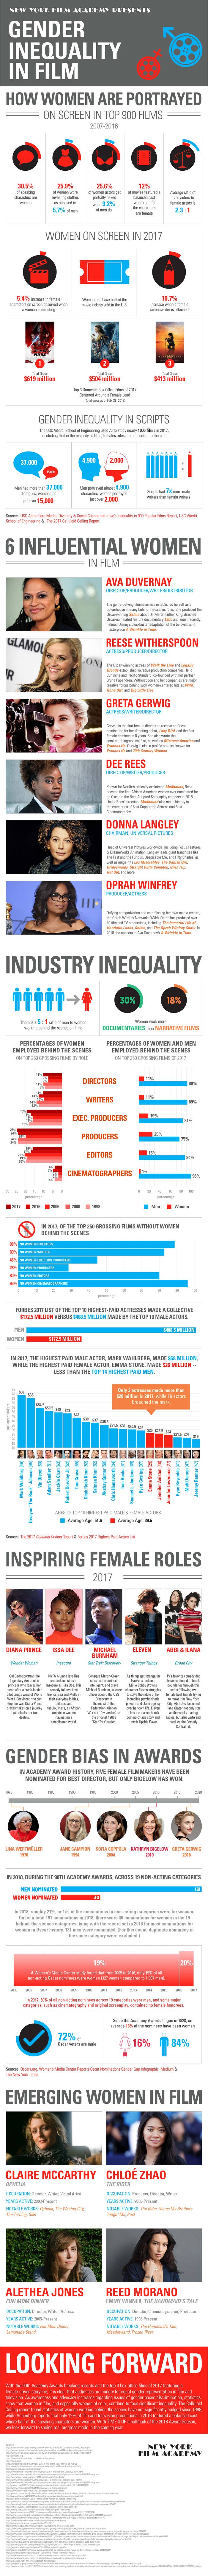 Gender Inequality in Film infographic by the New York Film Academy.